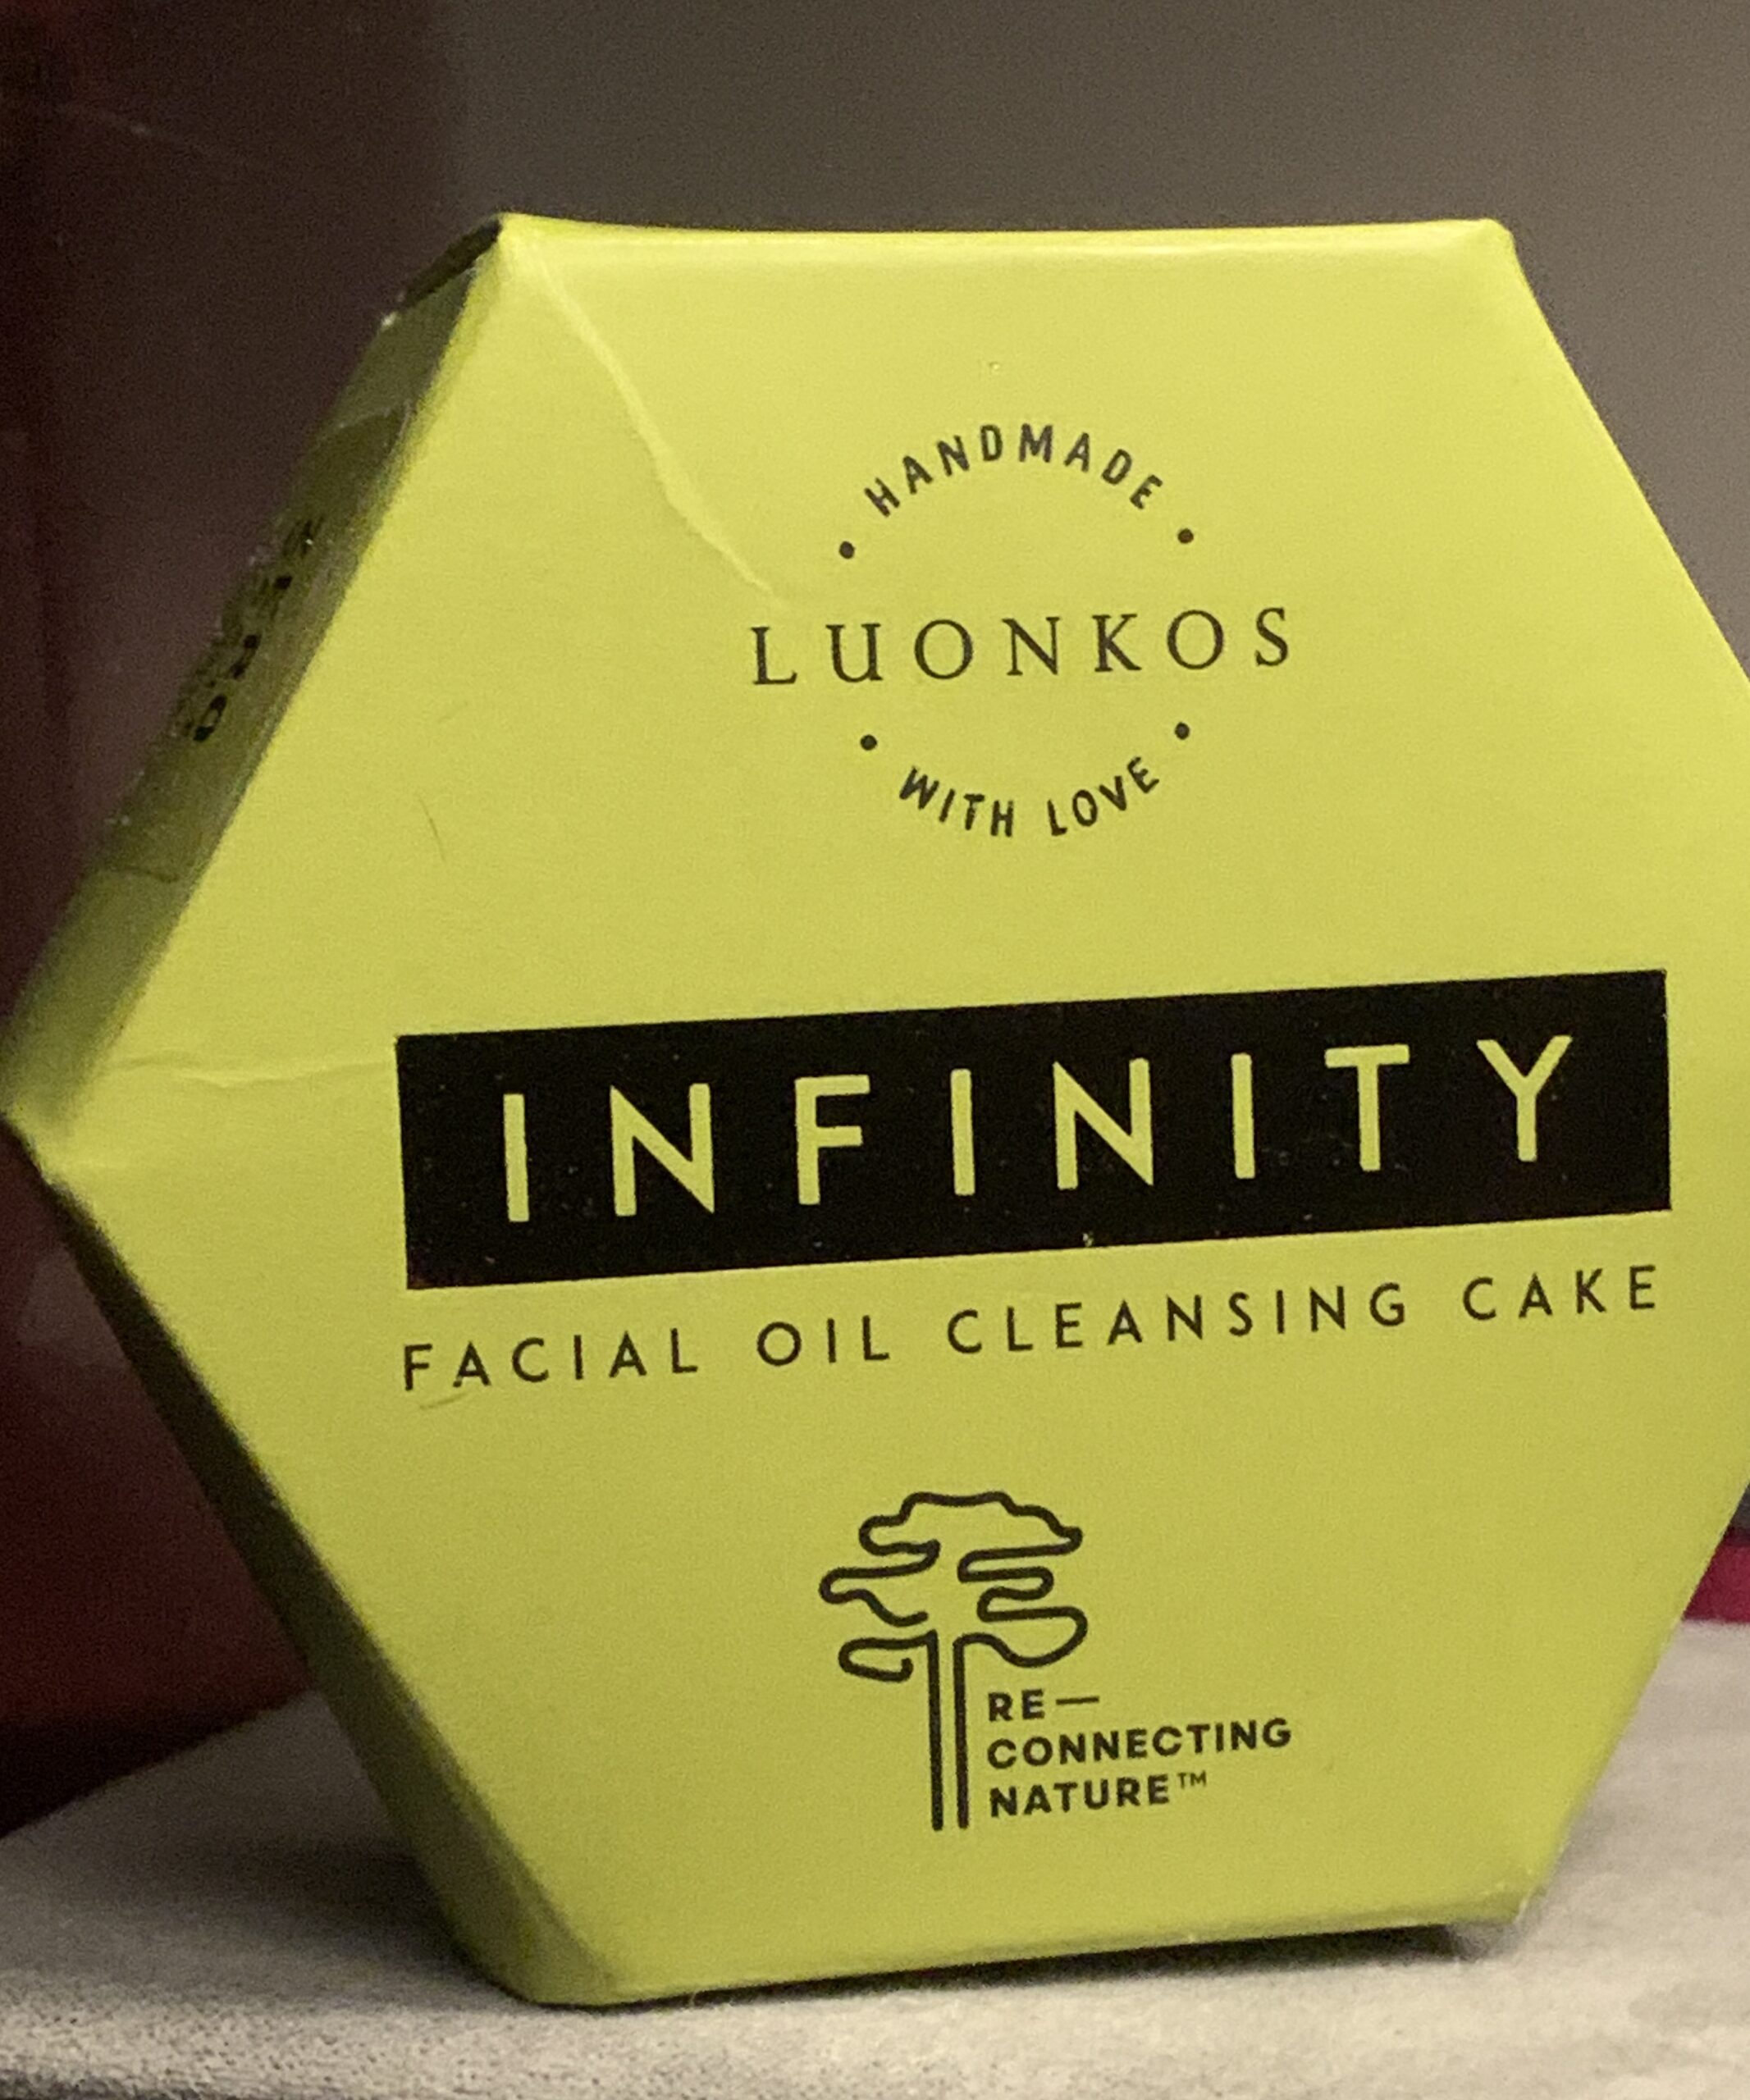 Luonkos Infinity facial oil cleansing cake